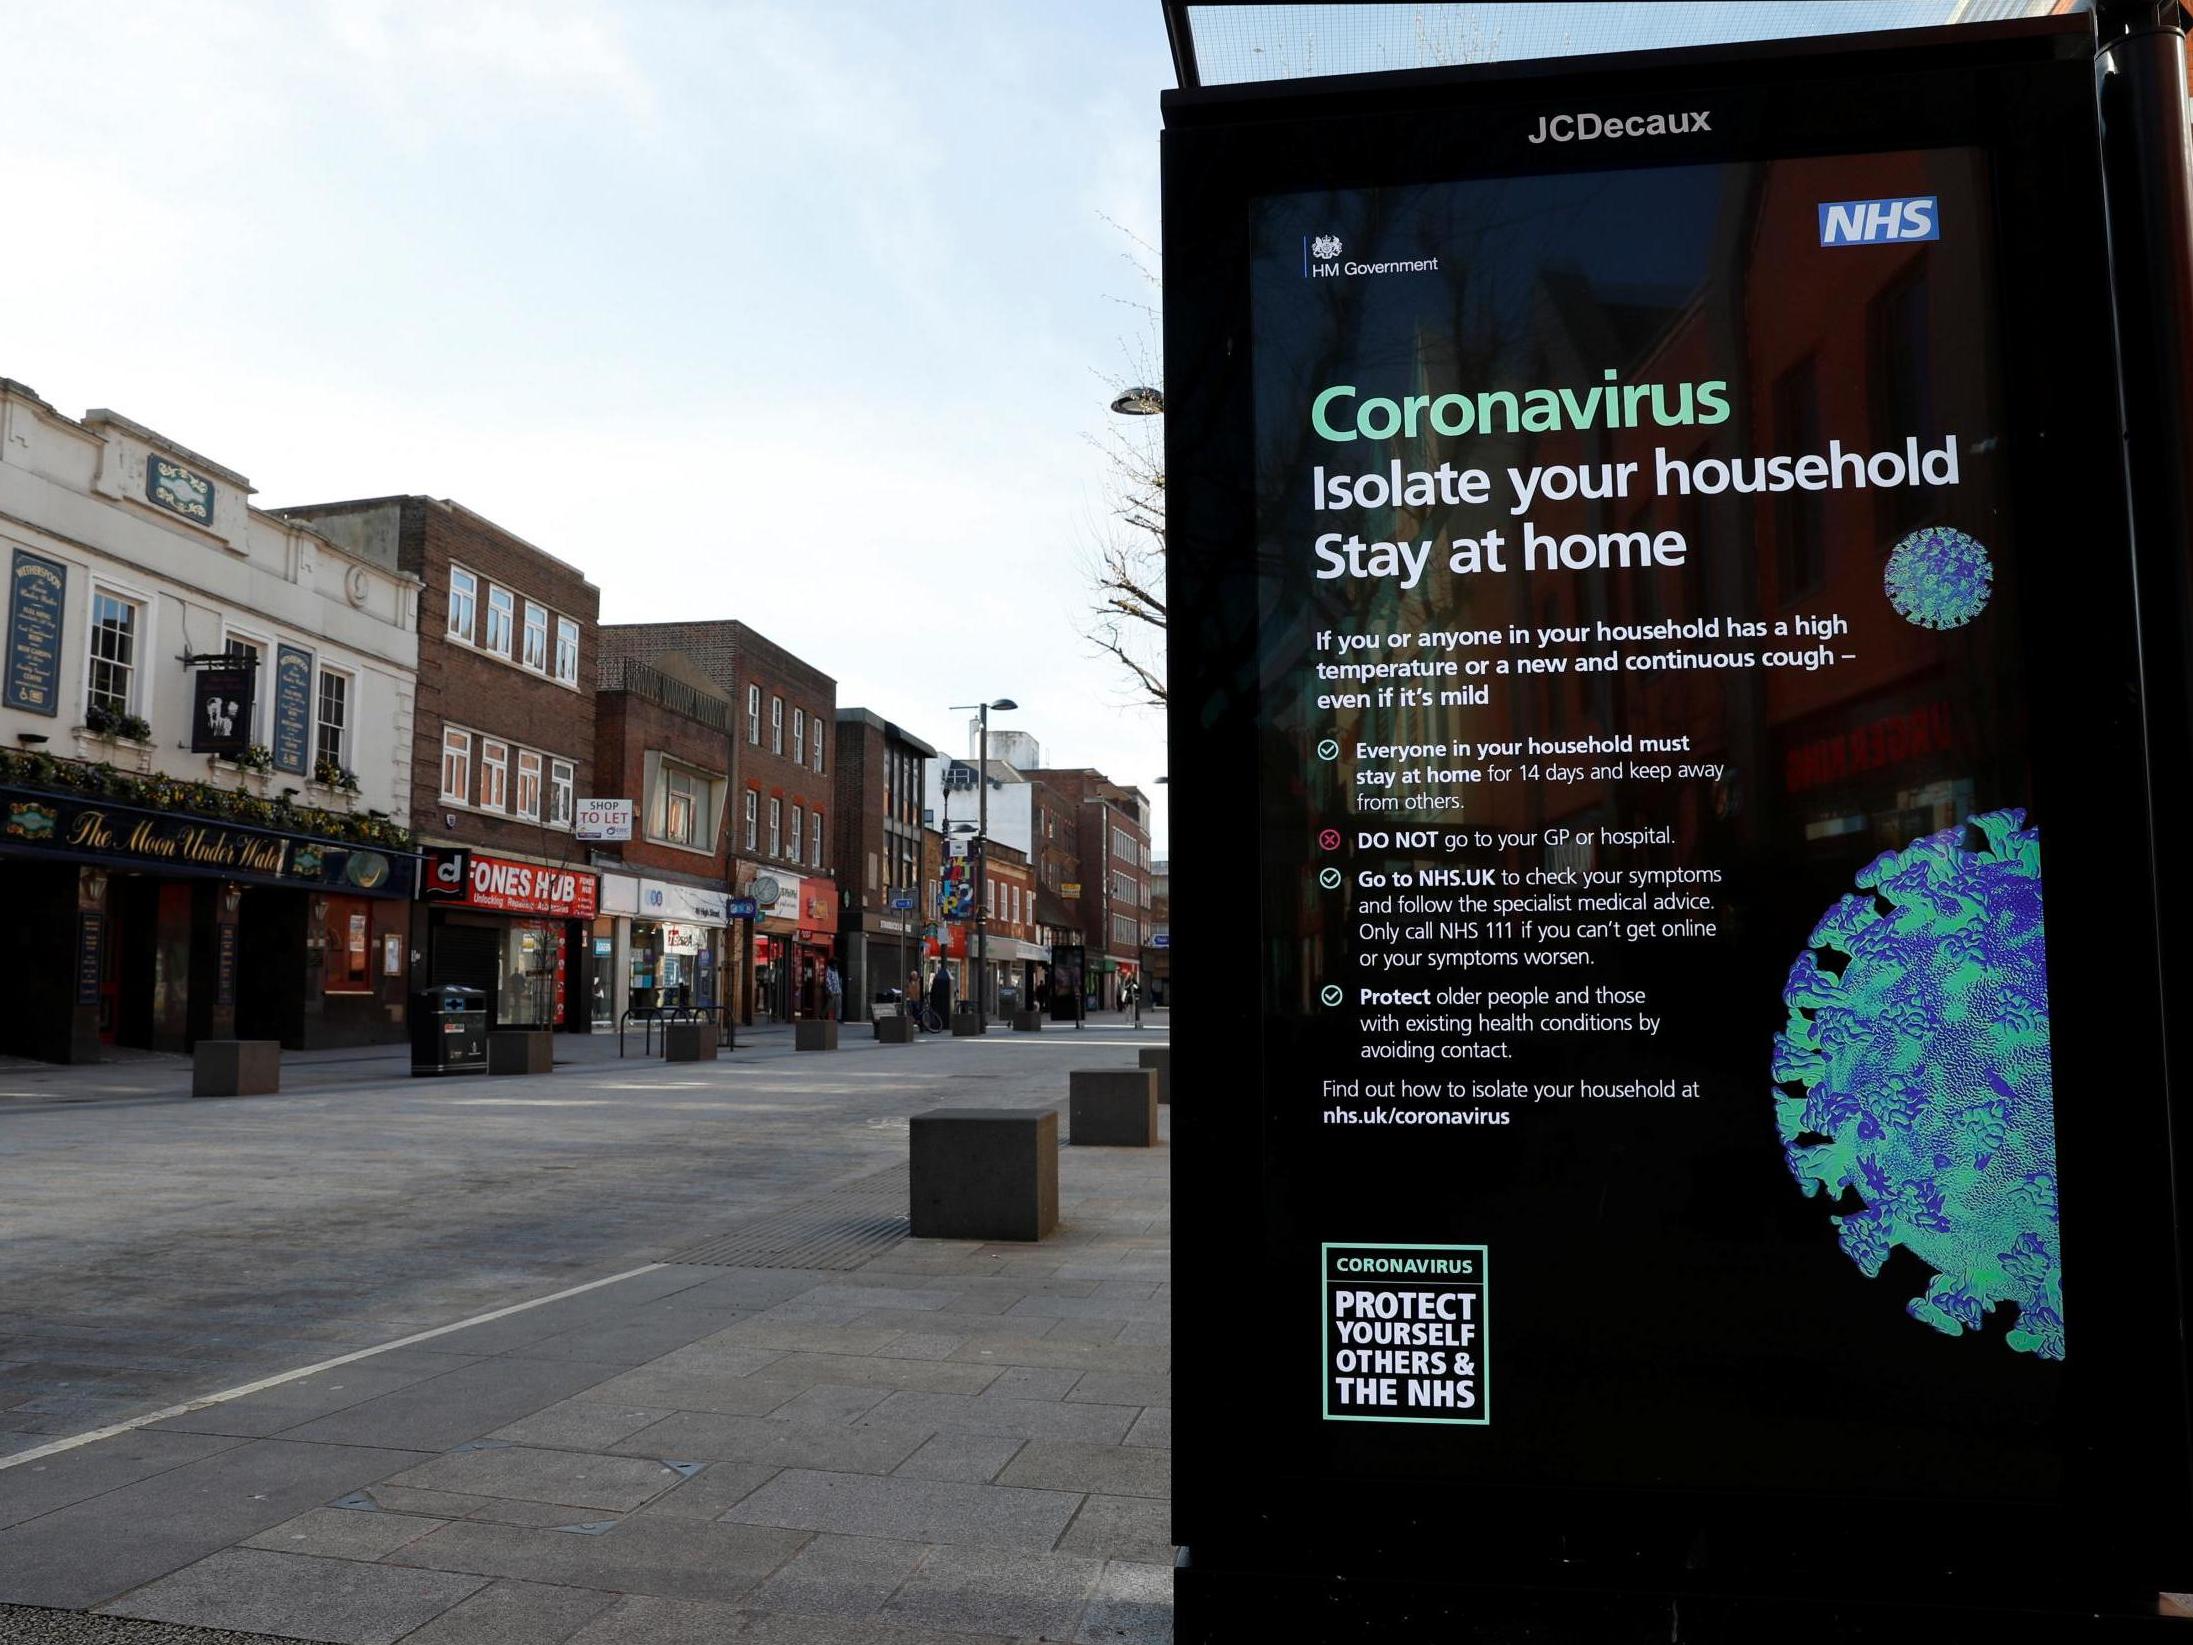 An information sign in an empty street tells people to stay at home